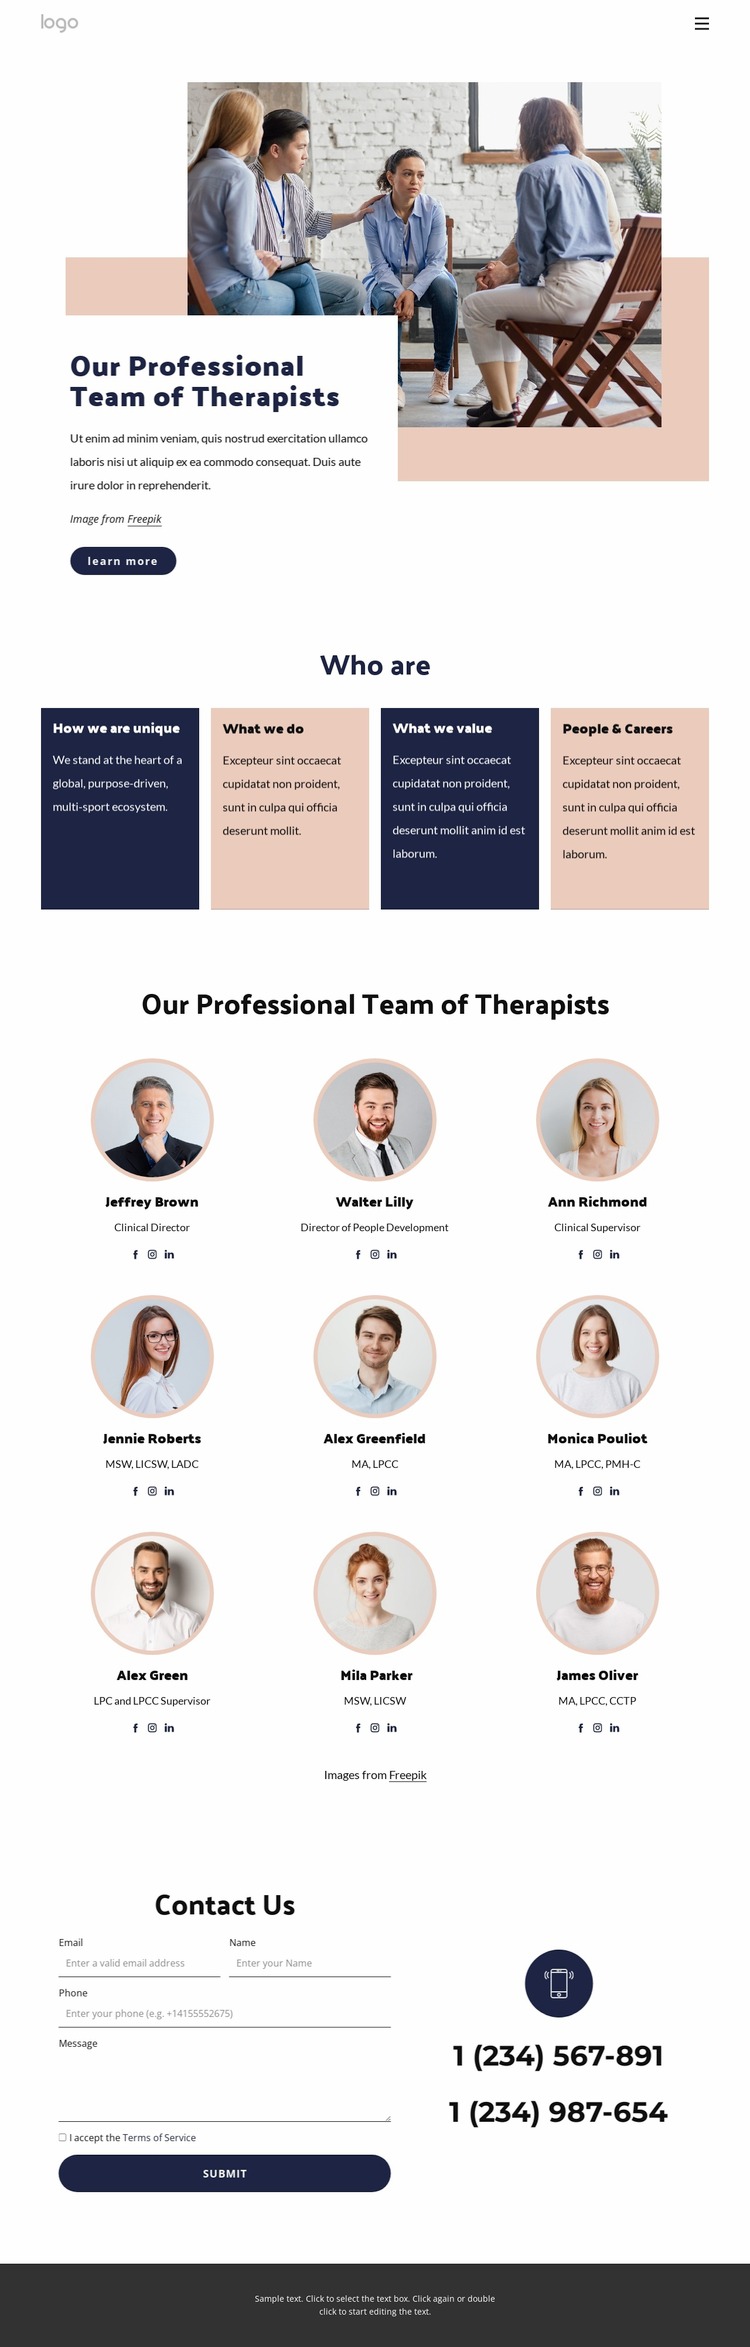 Our professional team of therapists WordPress Website Builder